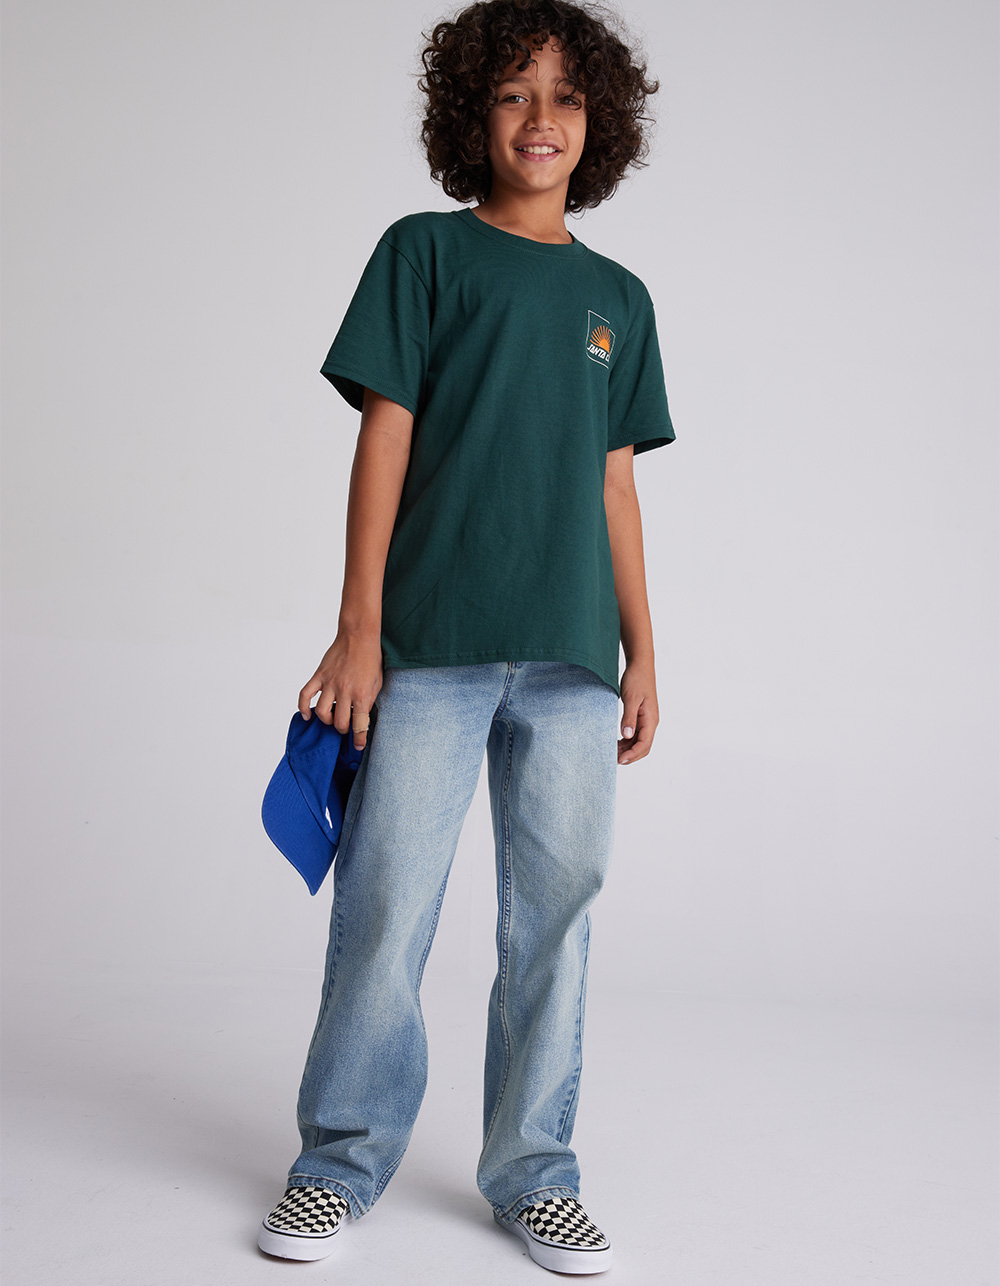 Tilly's: Boys RSQ Jeans and Pants - 2 for $50, Limited Time Only